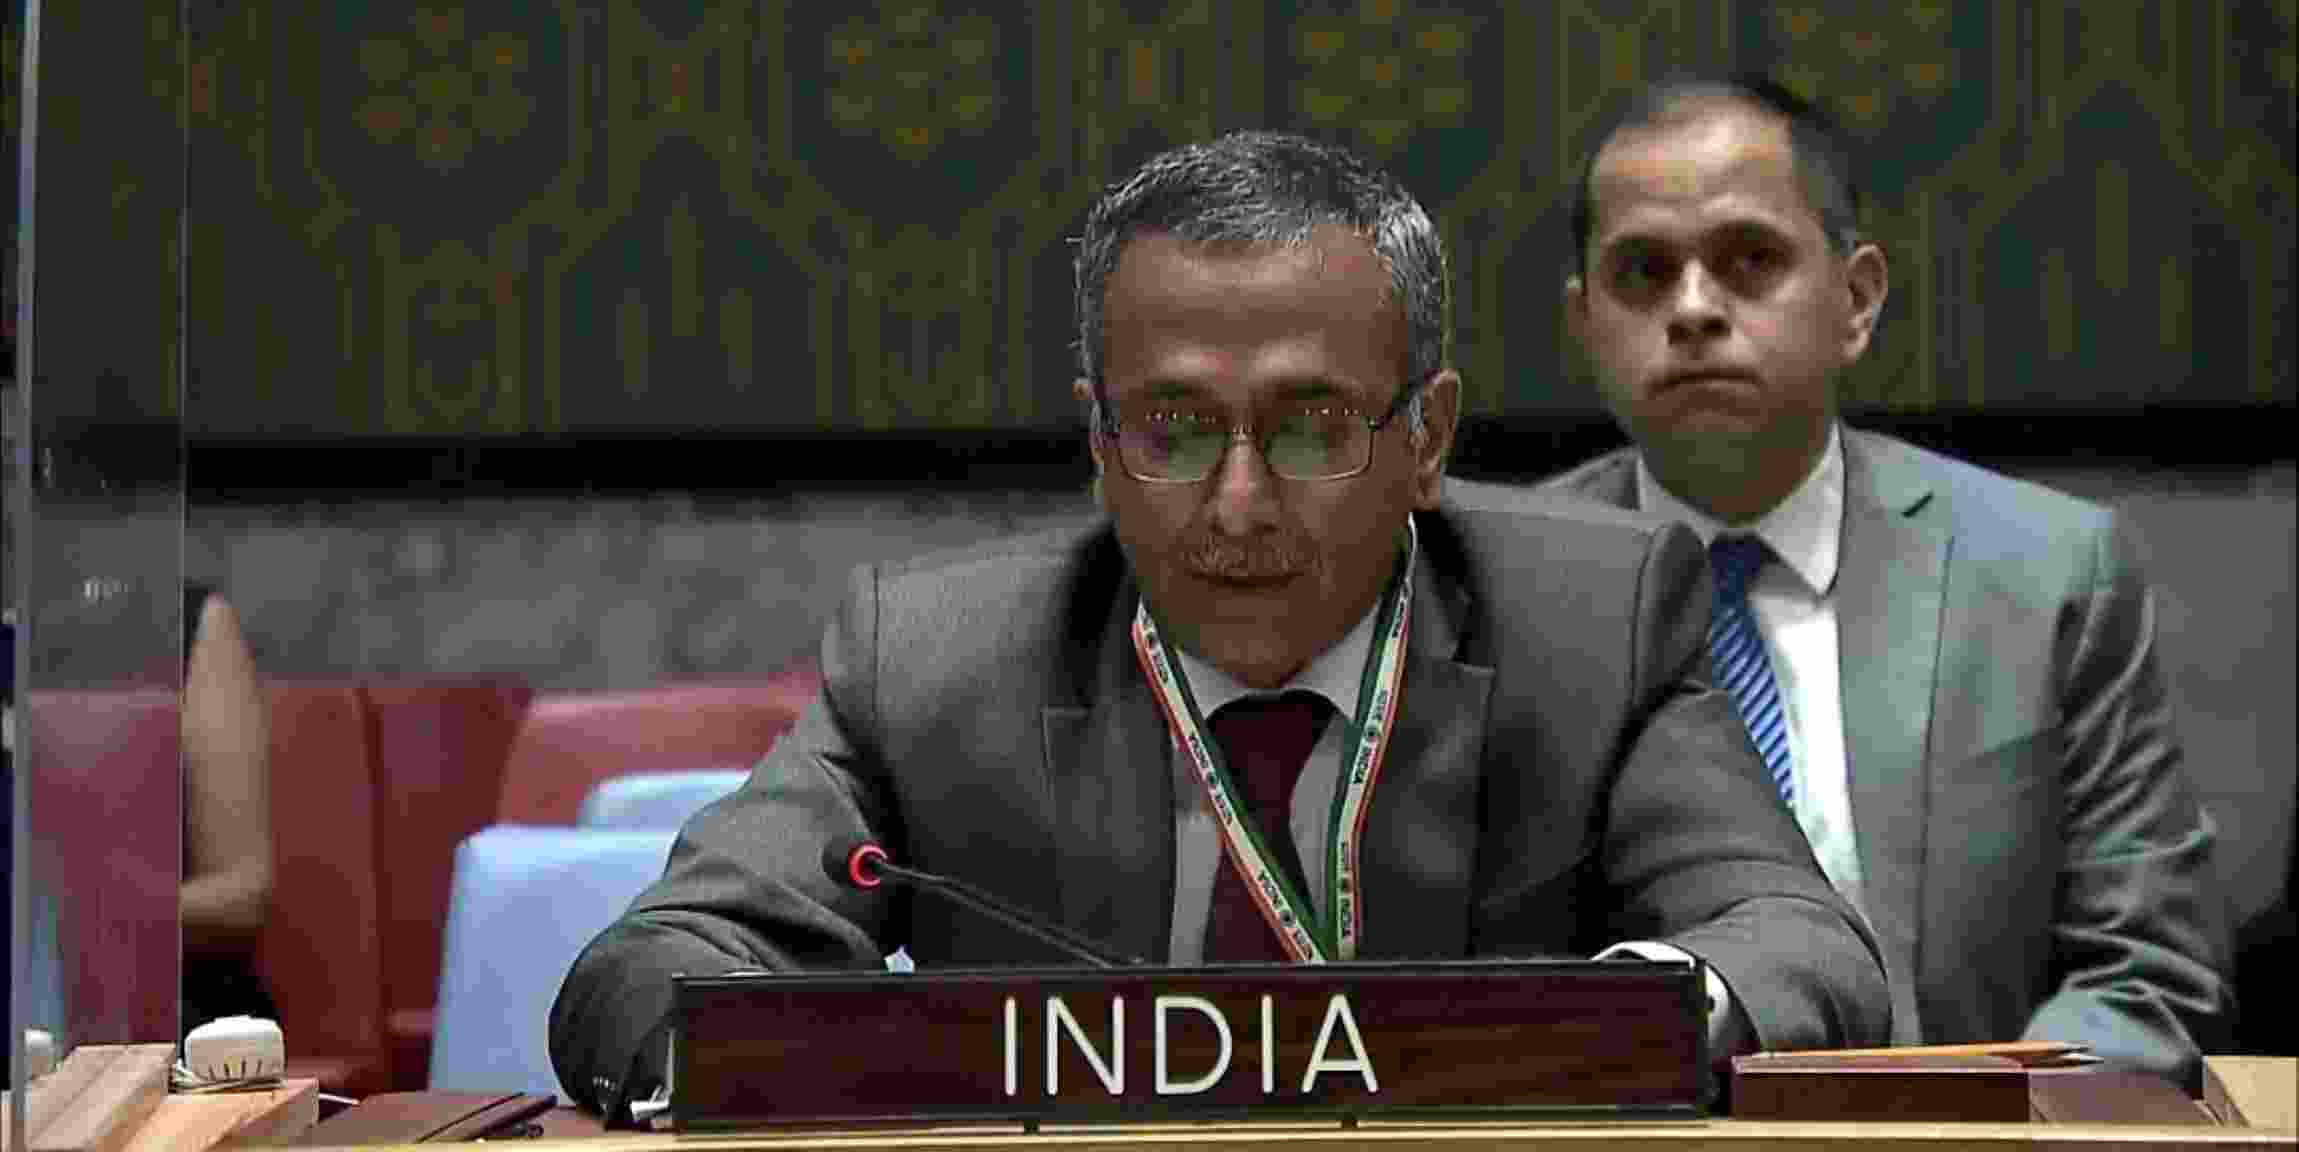 During the UNSC open debate on Children and Armed Conflict, India's Deputy Representative to the UN, R Ravindra, responding to Pakistan's comments, stated, "I categorically dismiss and condemn these baseless remarks with the contempt they deserve."